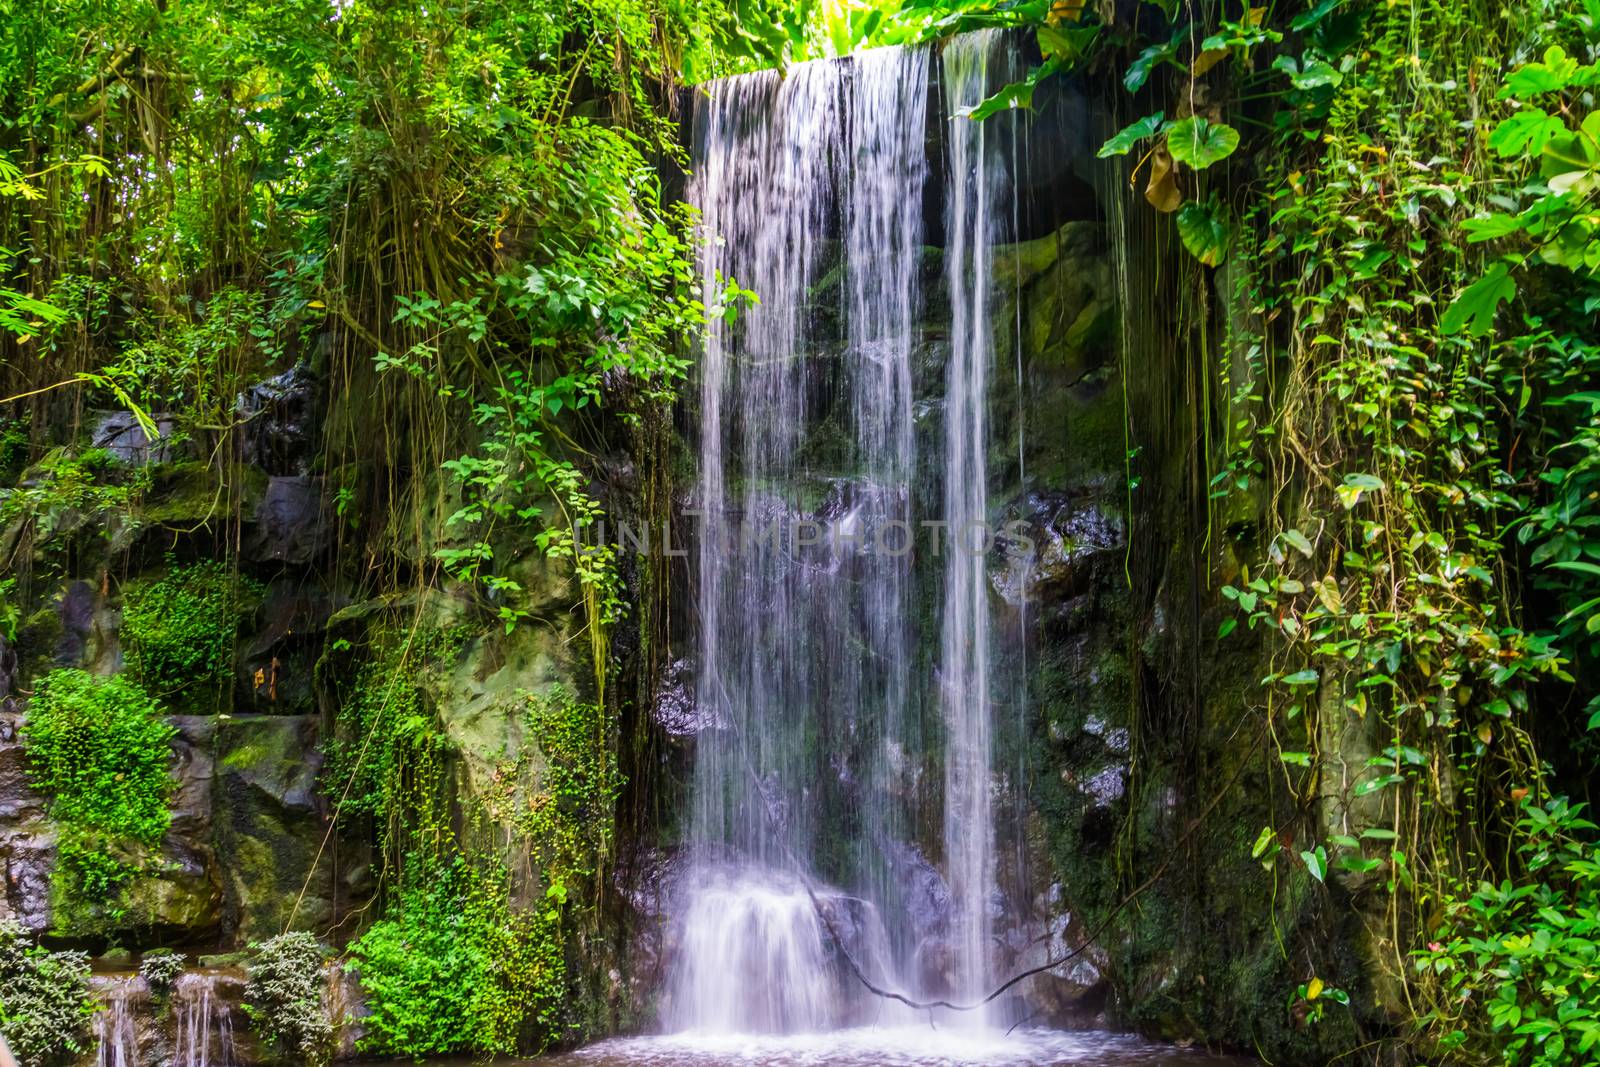 streaming waterfall with many plants in a jungle scenery, beautiful nature background